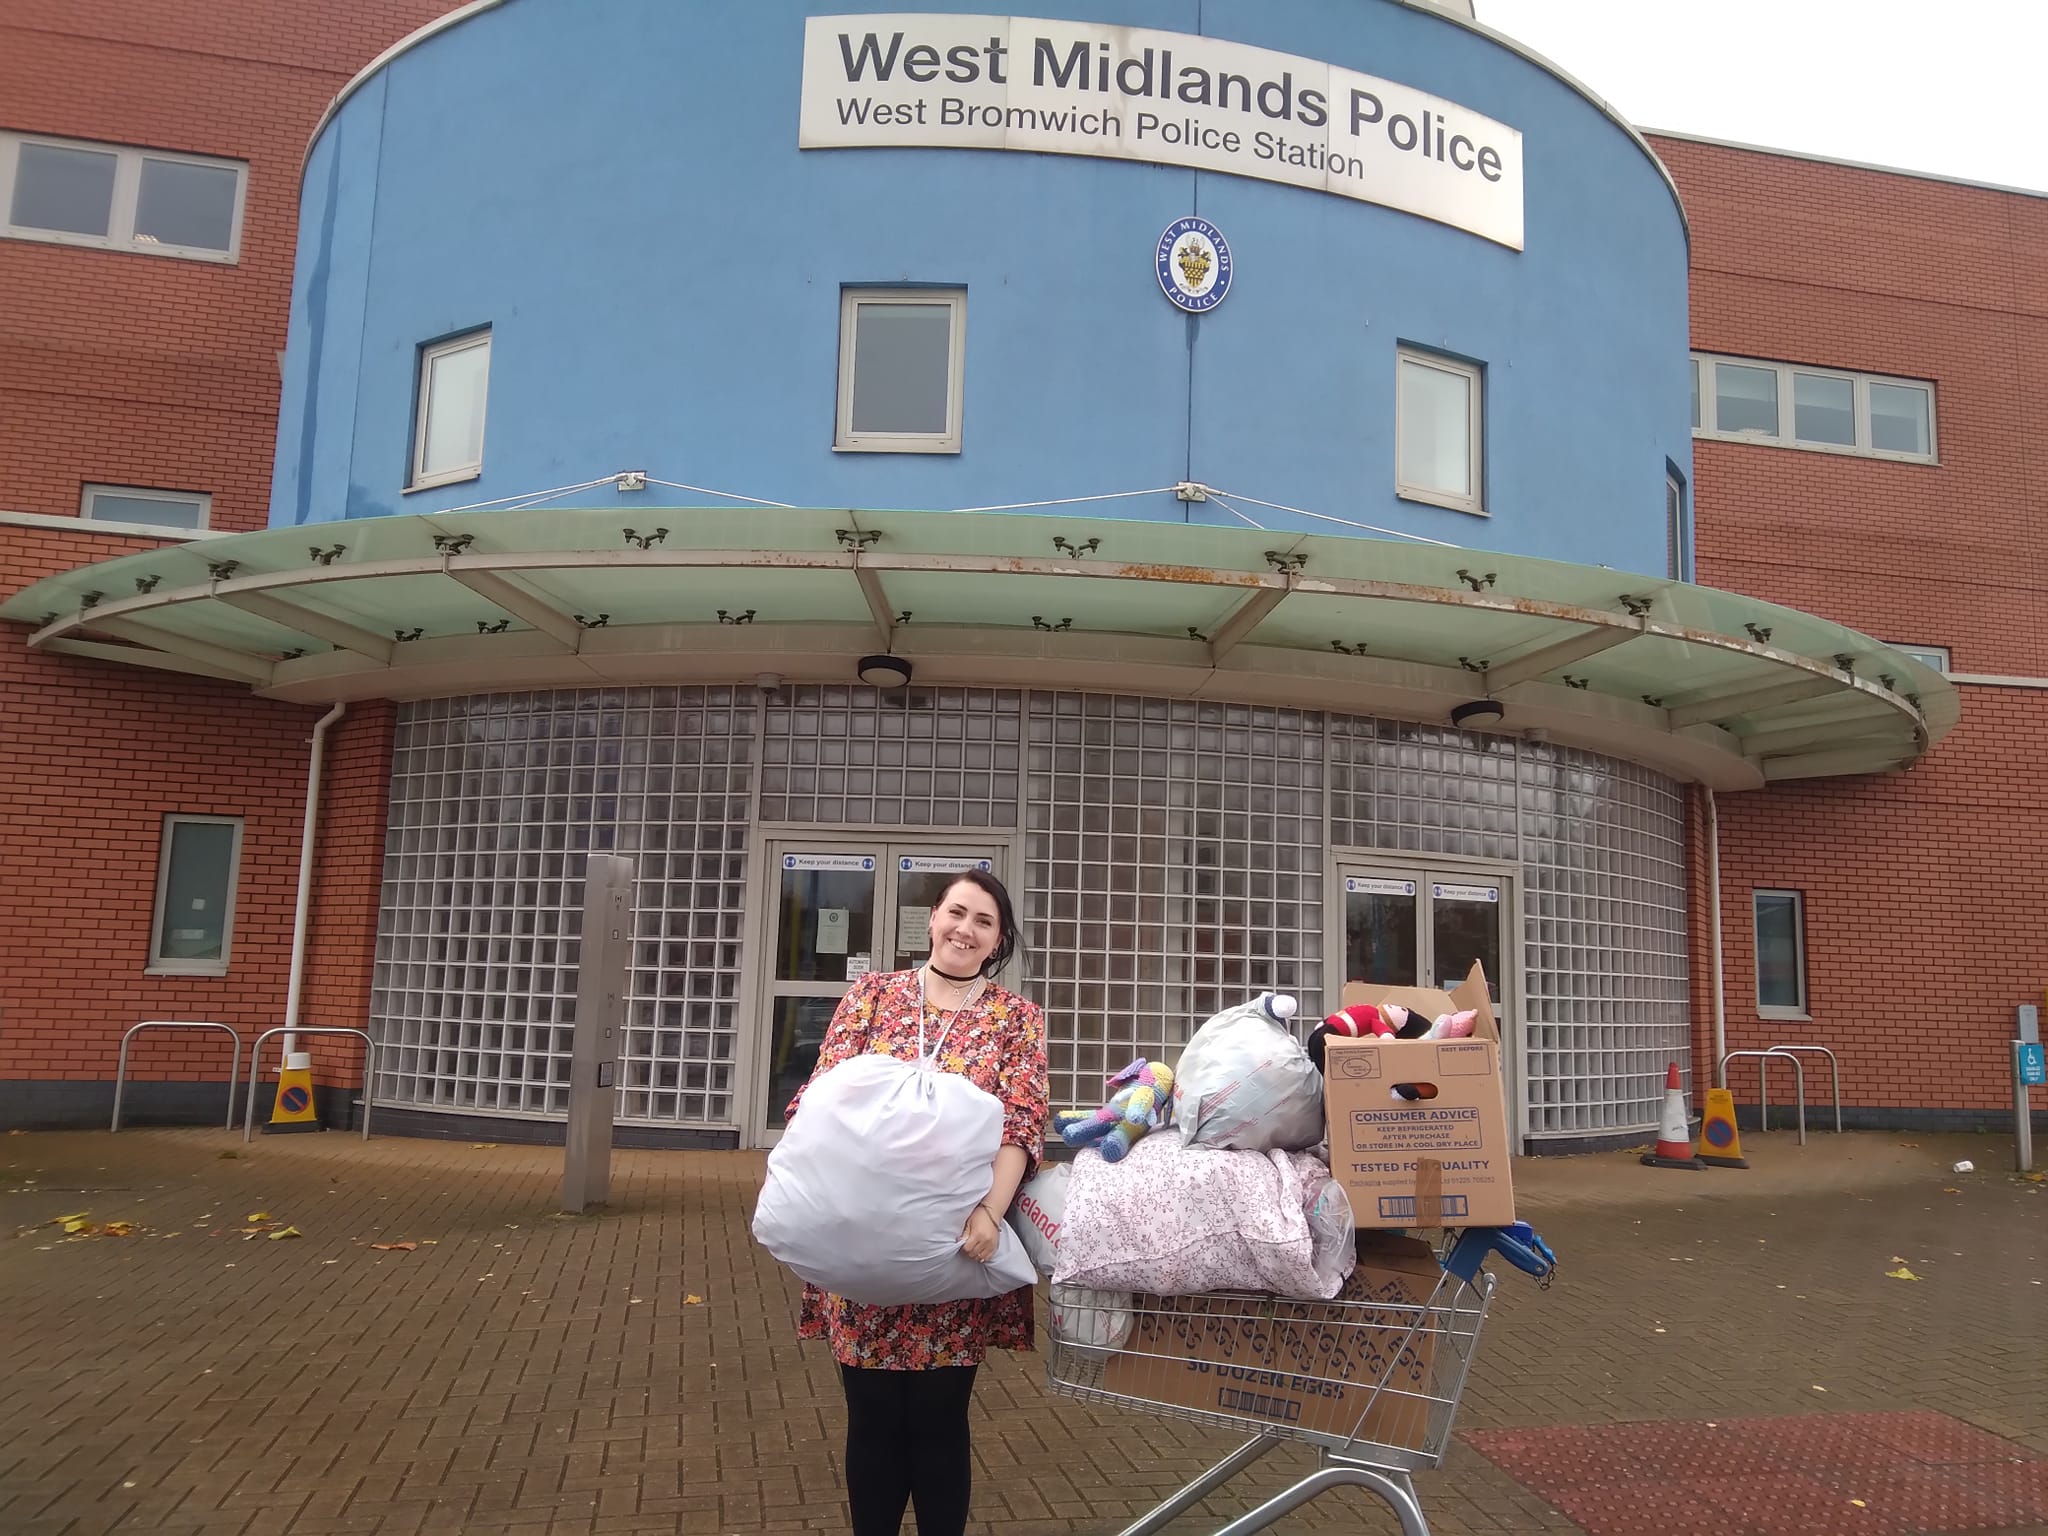 Donation Collection from West Midlands Police